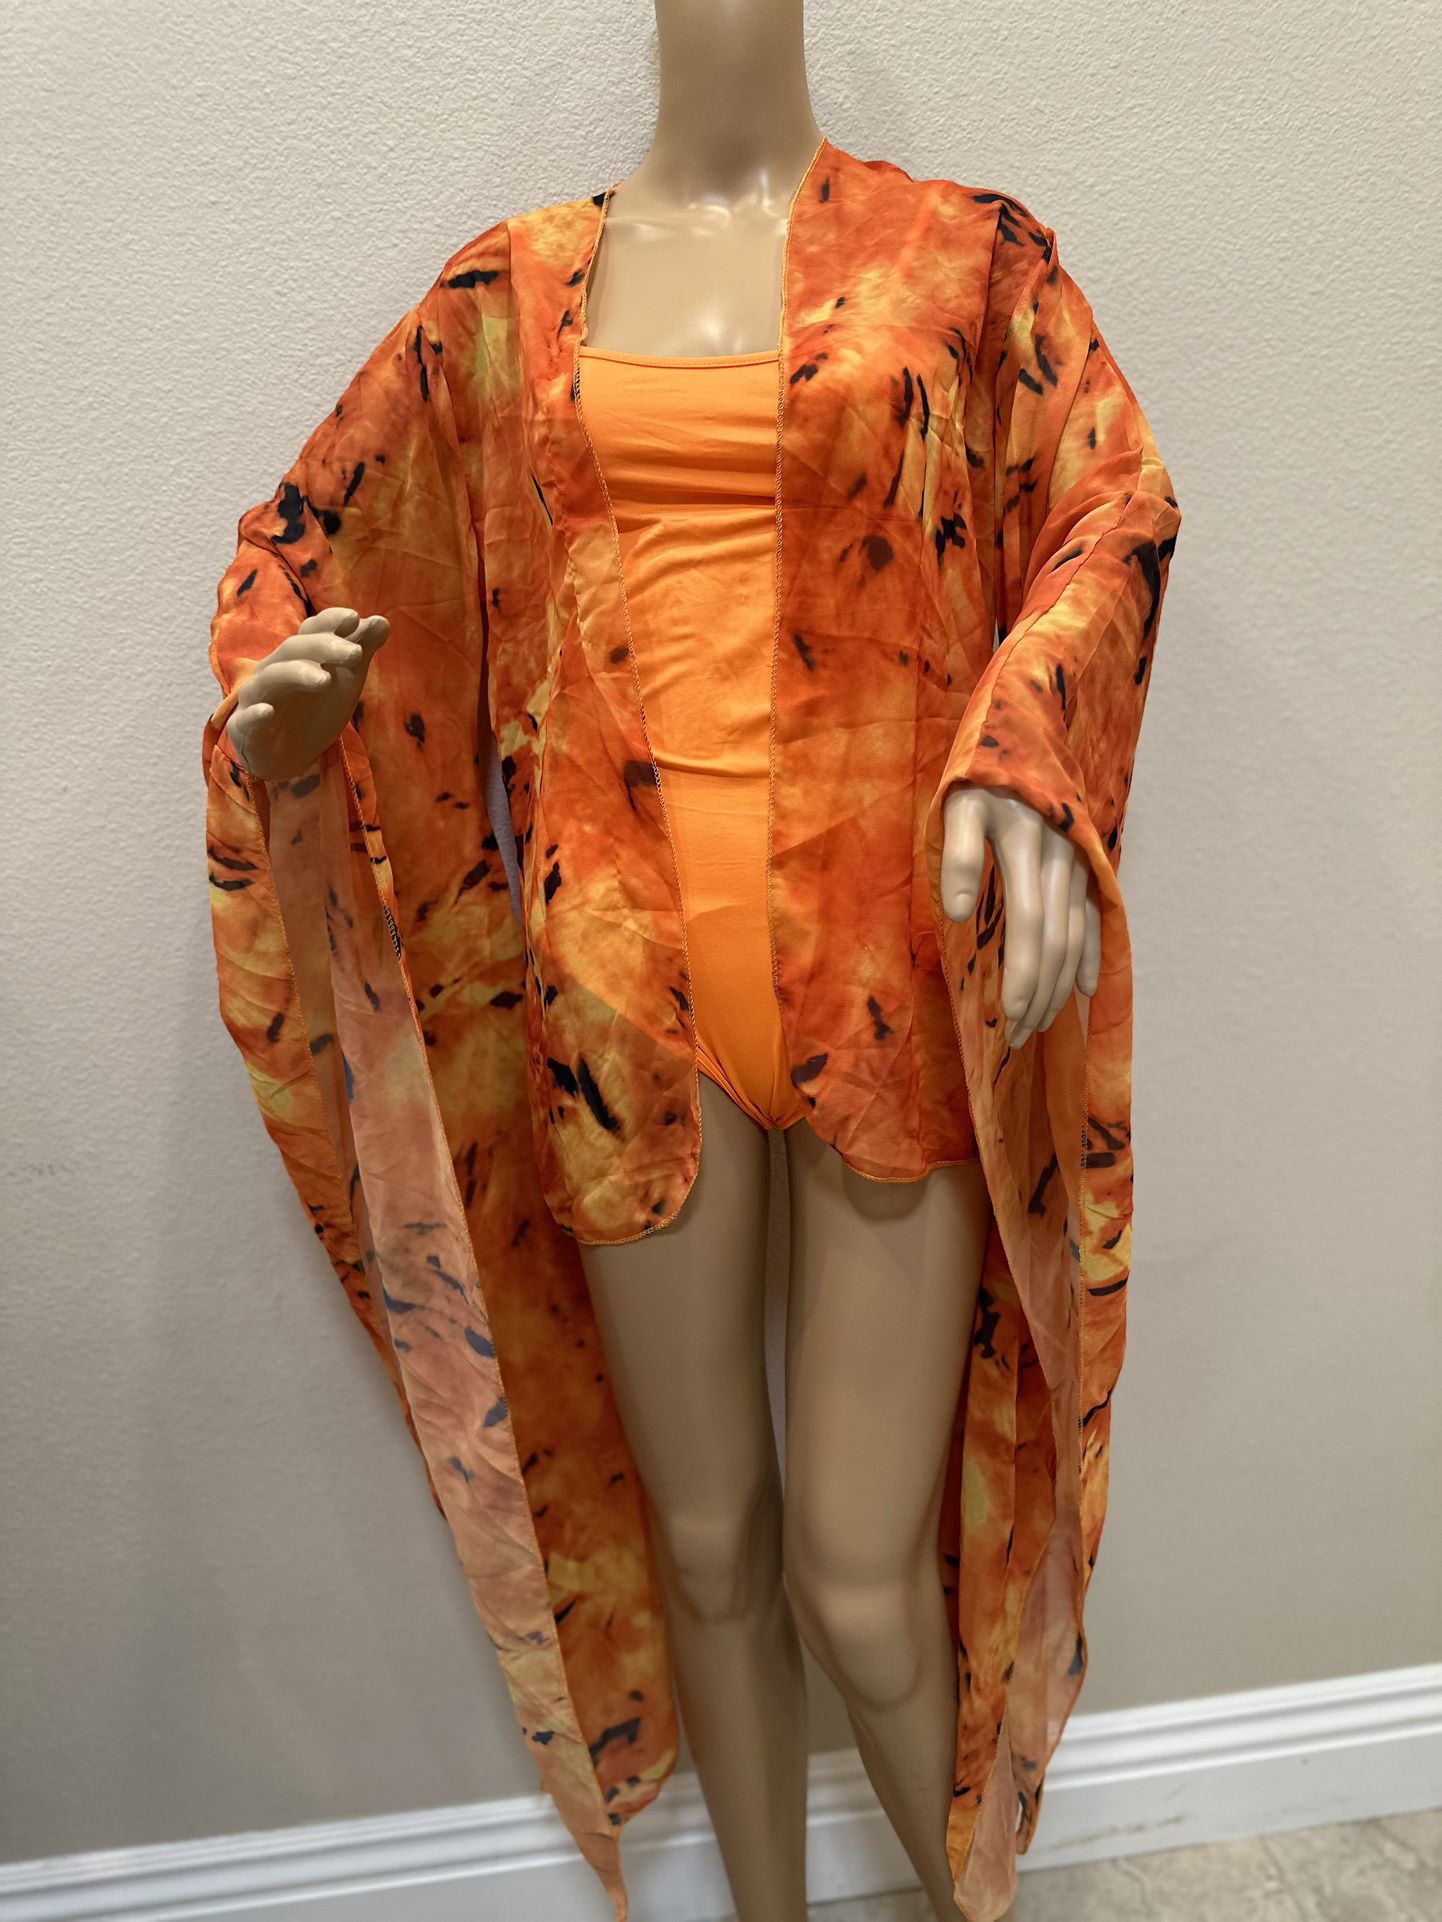 Bright Orange 2 Piece Tank Swimsuit And Butterfly Sleeve Kimono Robe Cover Up Medium Large 6/7